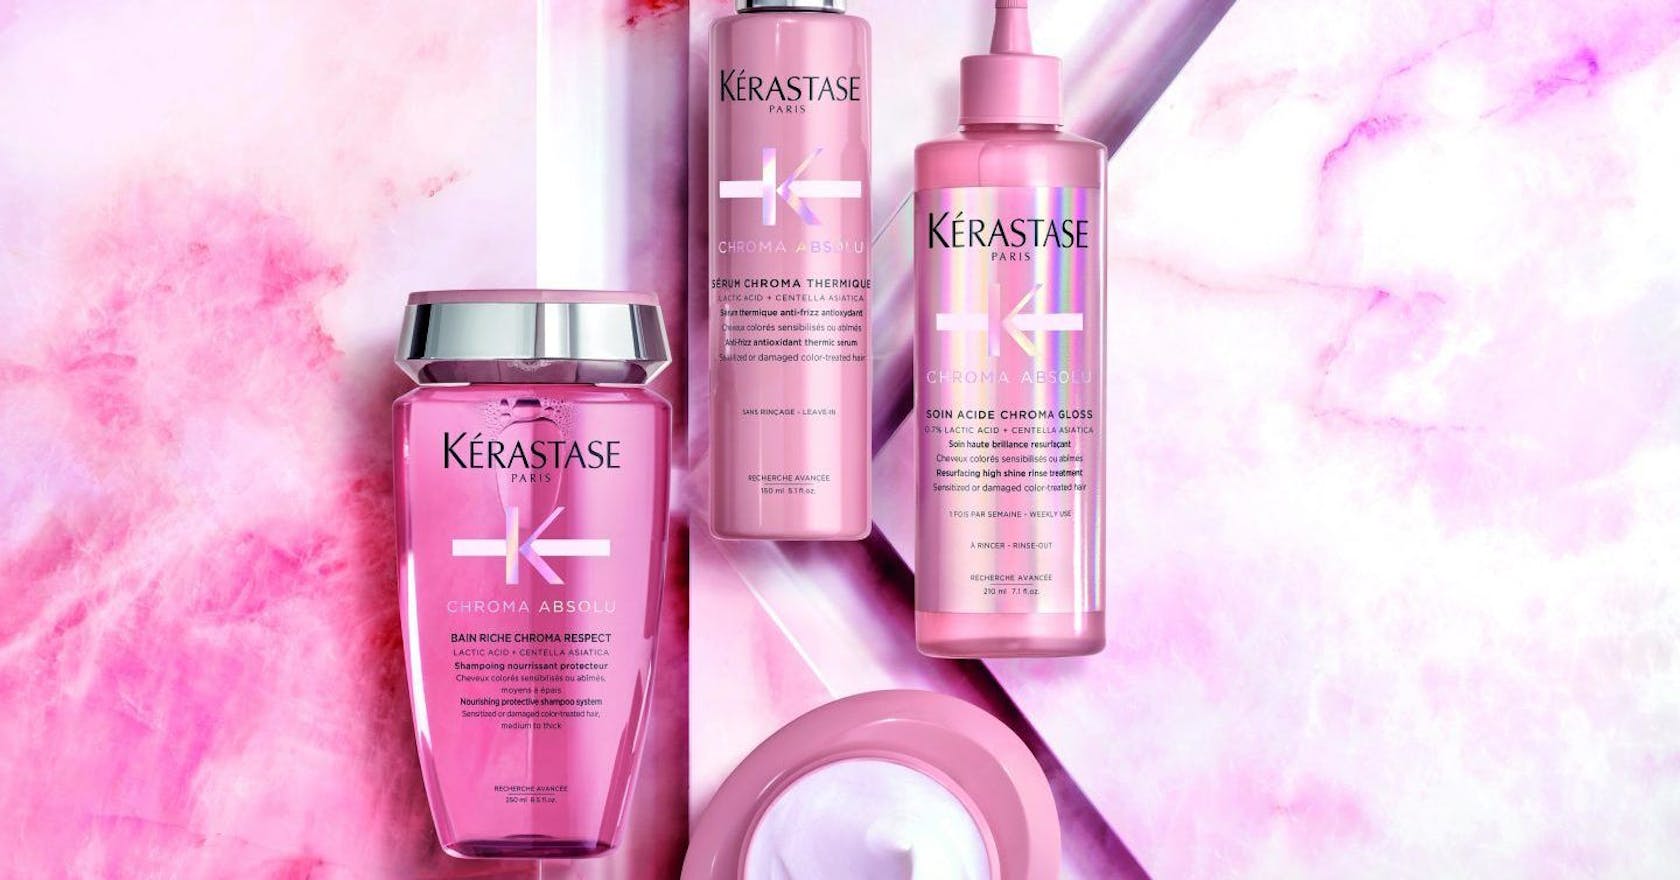 Win a luxury haircare holiday coffret by Kérastase, worth £86.90*